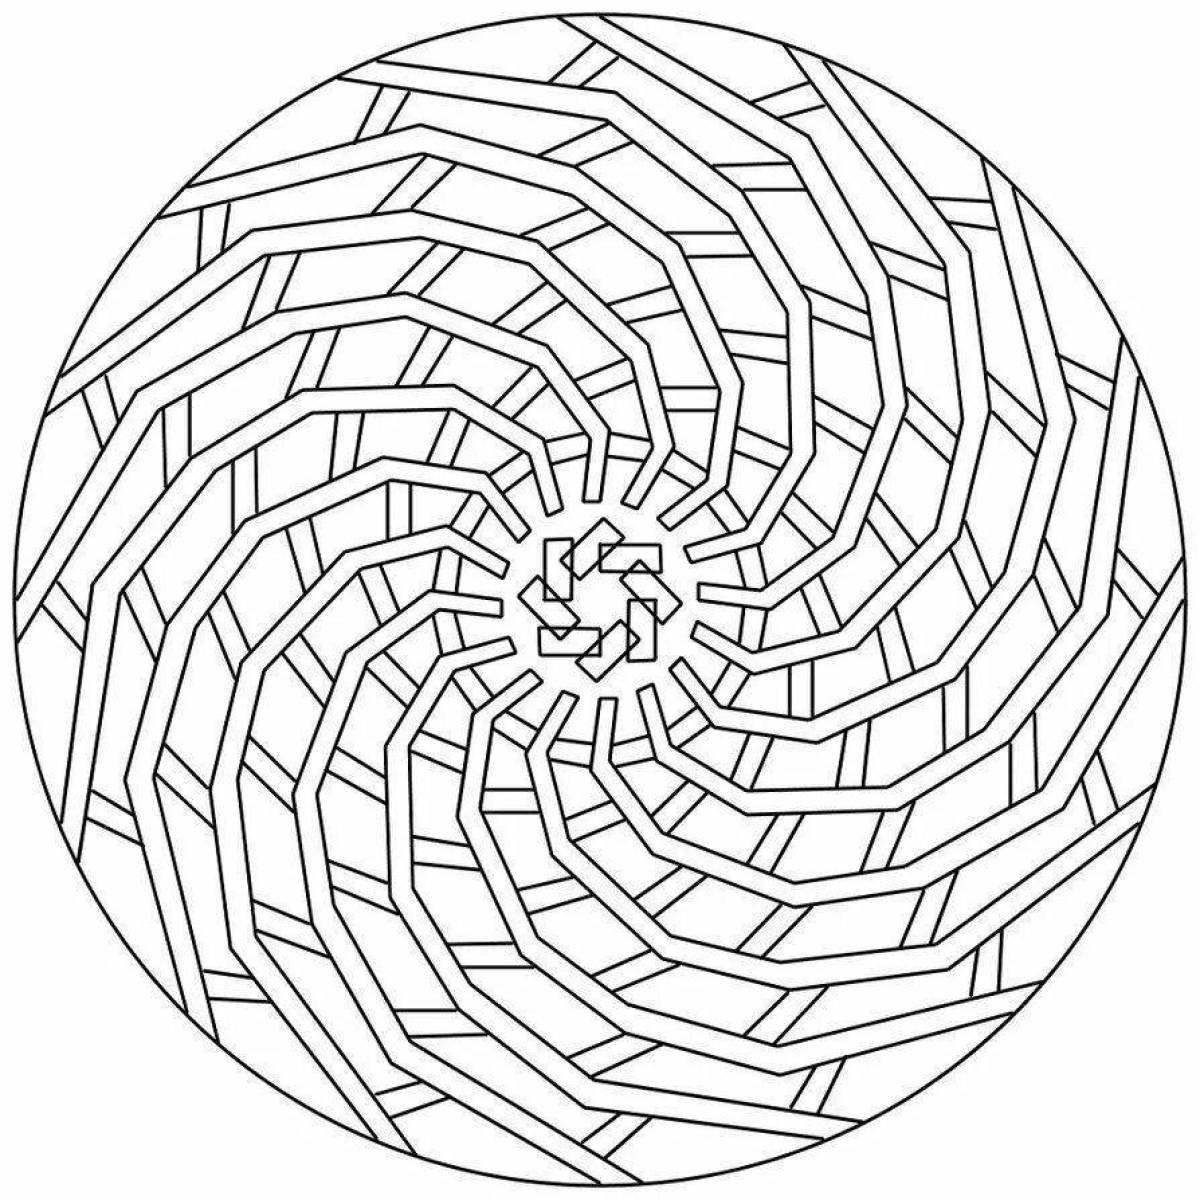 Colouring spiral with a complex circular pattern